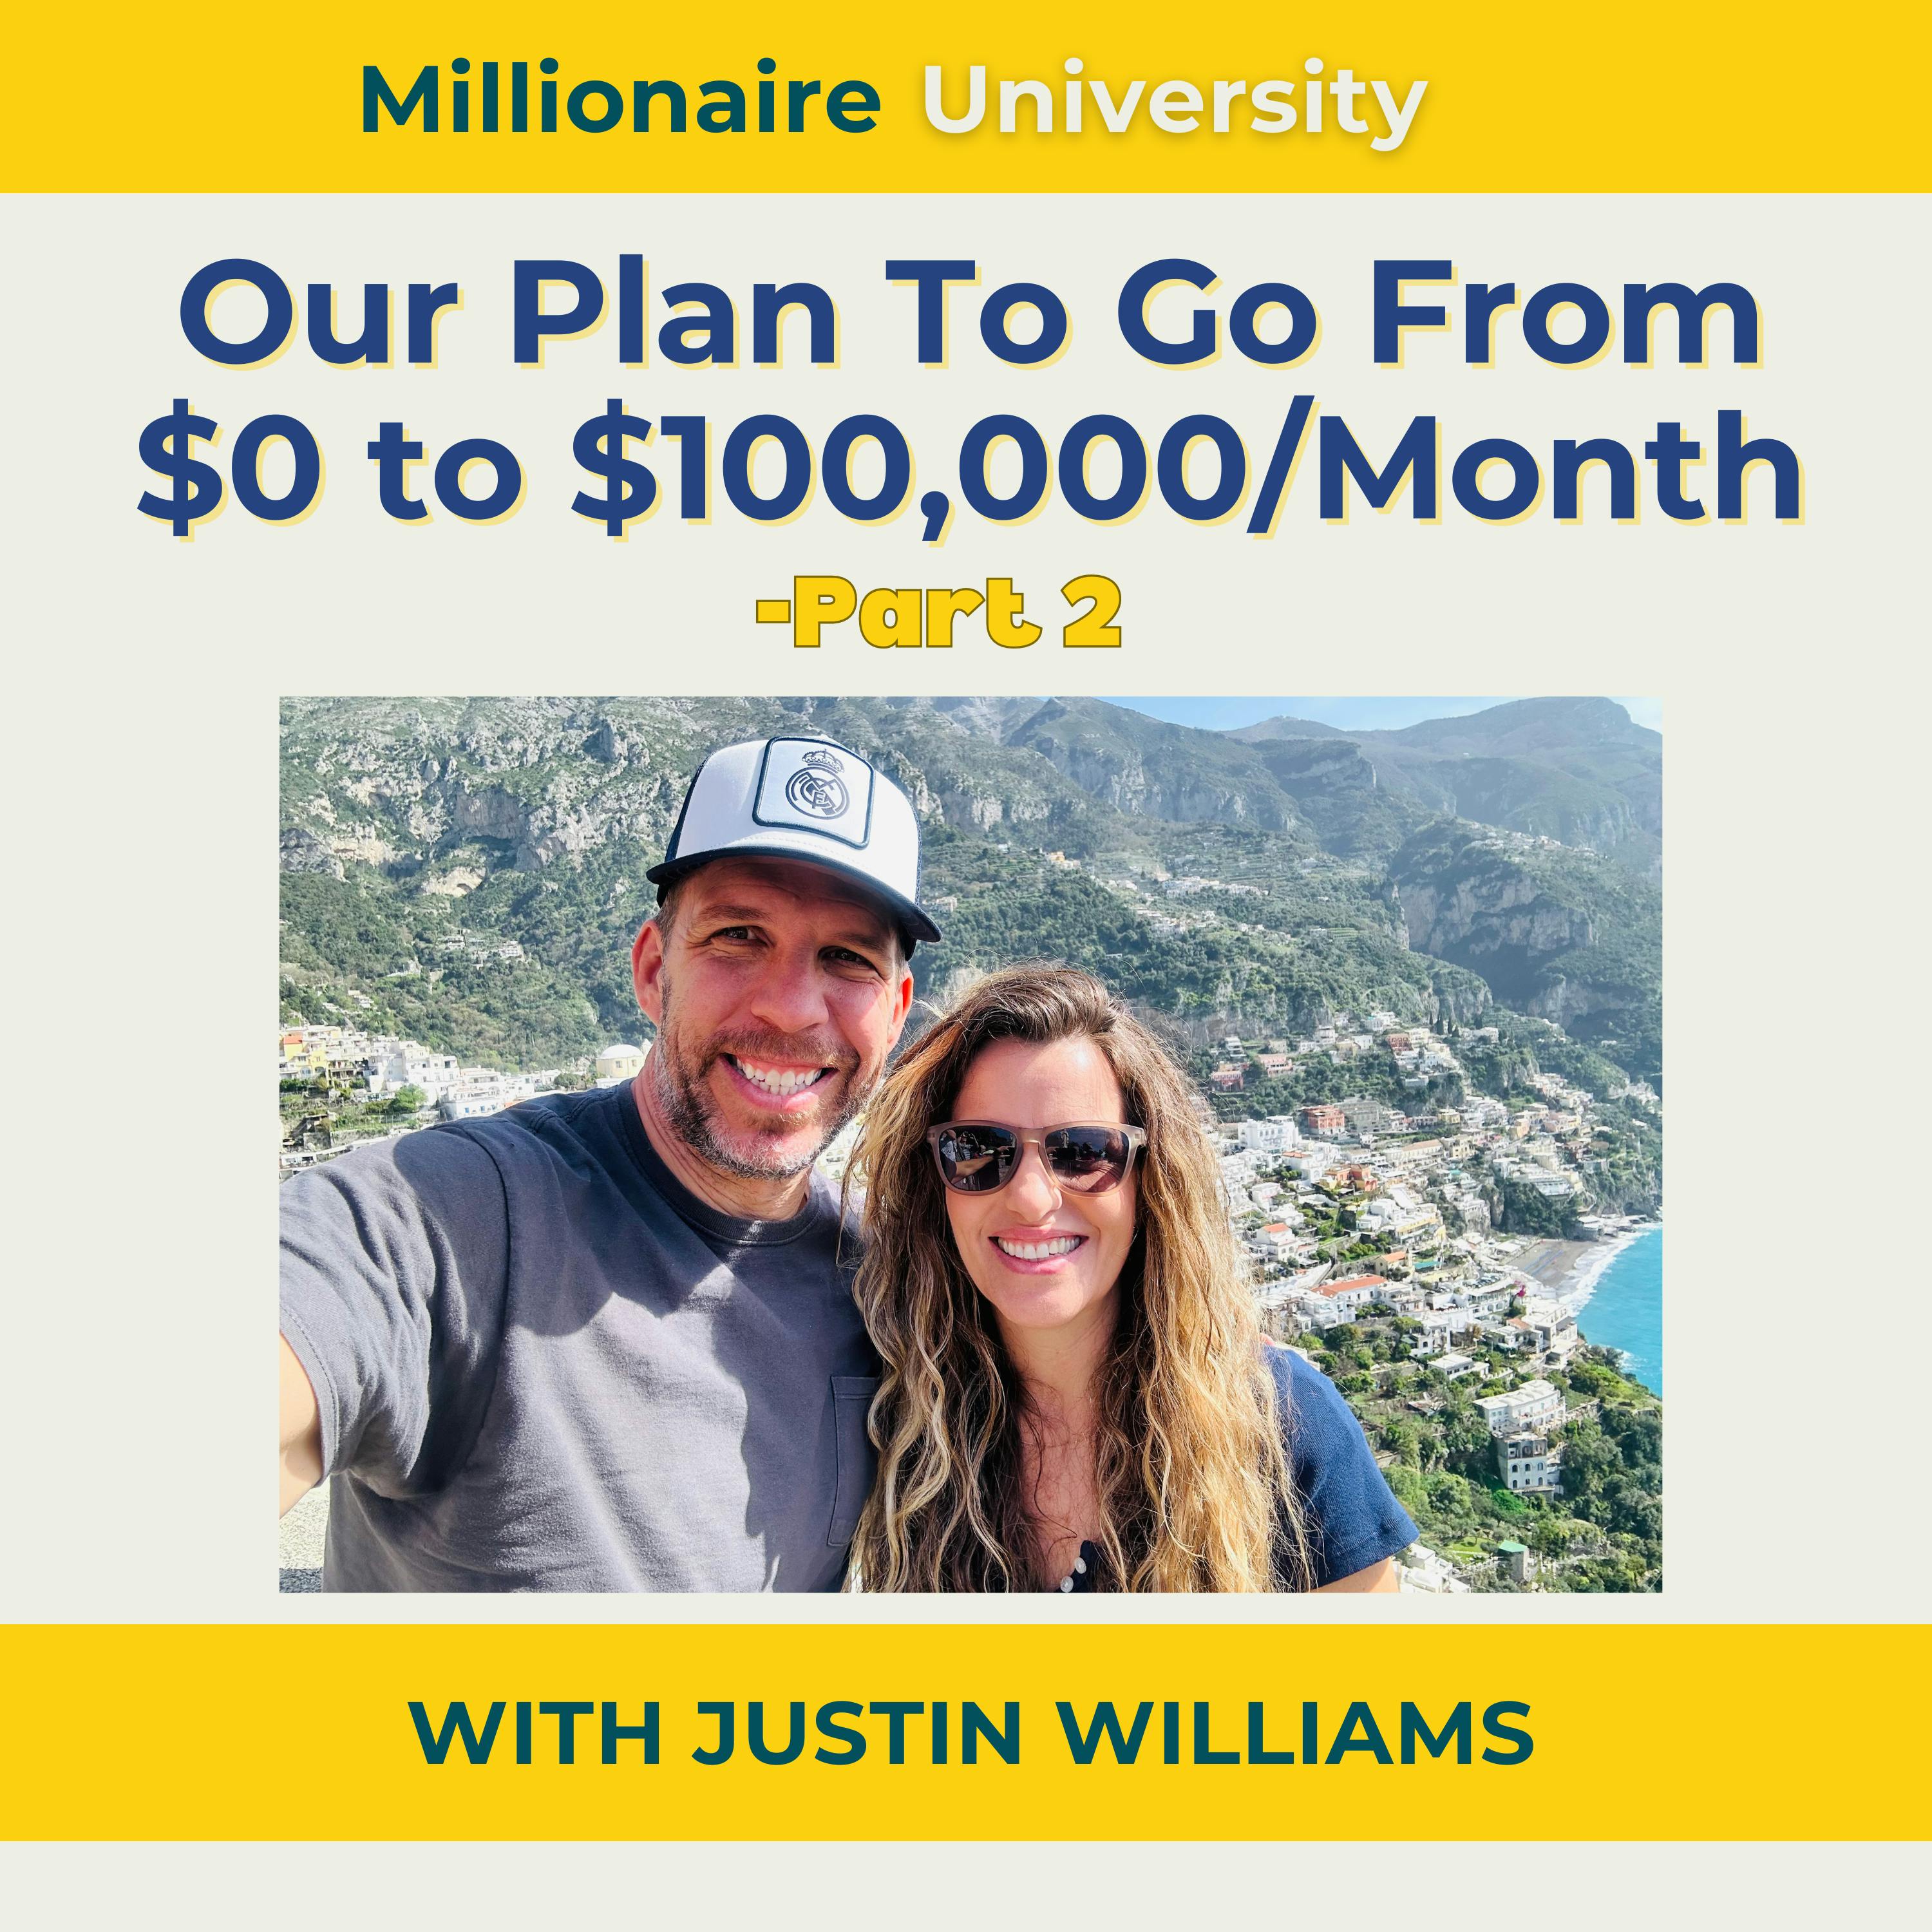 118. Our Plan To Go From $0 to $100,000/Month From Podcast Sponsorships in 12 Months - Part 2